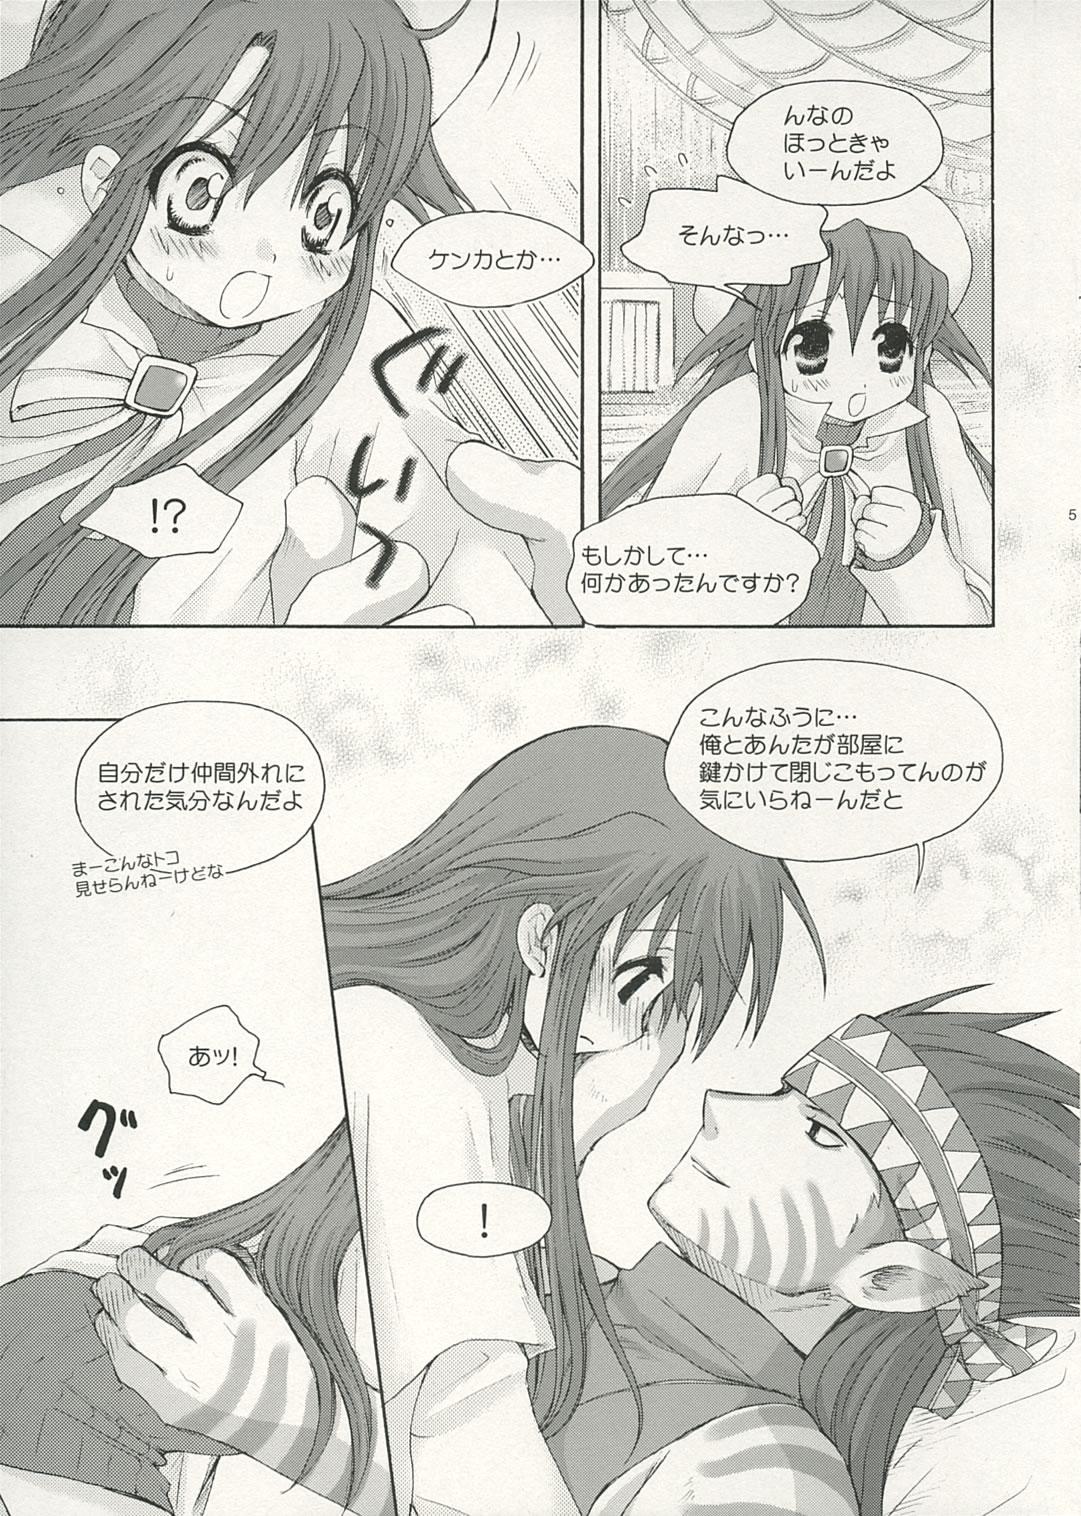 Tinder Zoo Zoo Zoo - Summon night First Time - Page 4